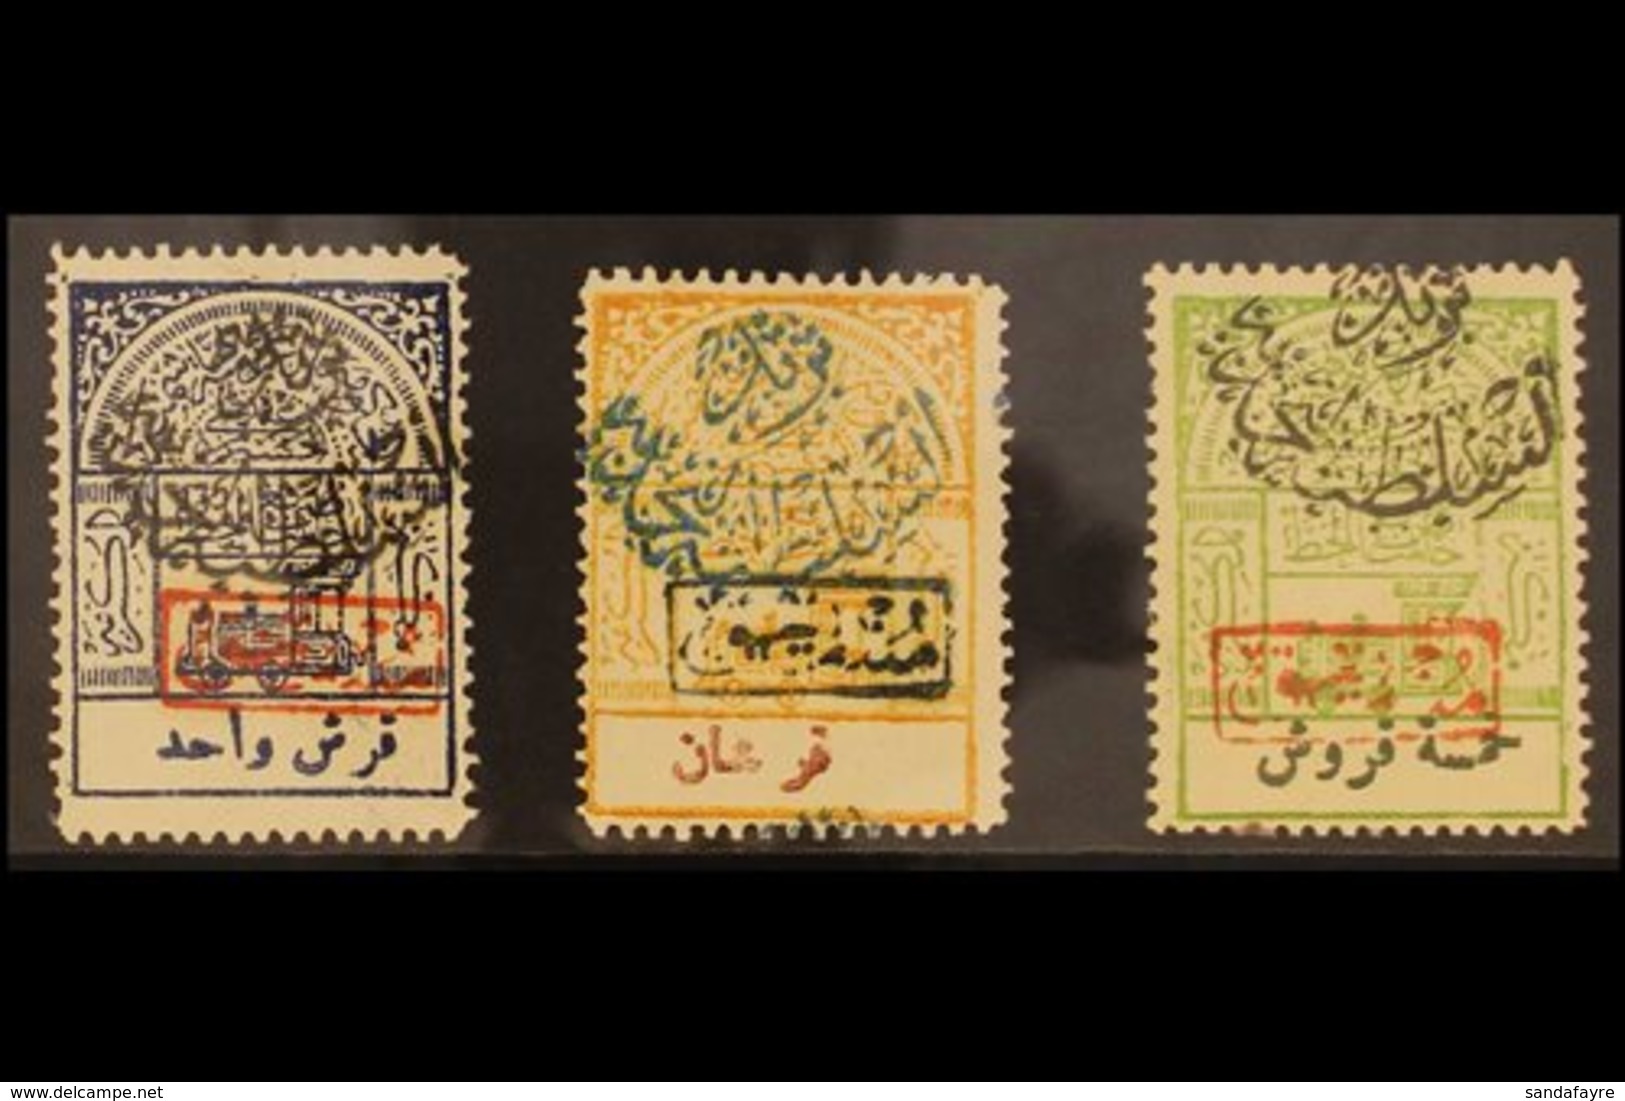 POSTAGE DUE  1925 (Aug) Handstamps On 1pi Blue, 2pi Orange, And 5pi Green Railway Tax Stamps, SG D232, D233, And D236, F - Saudi Arabia